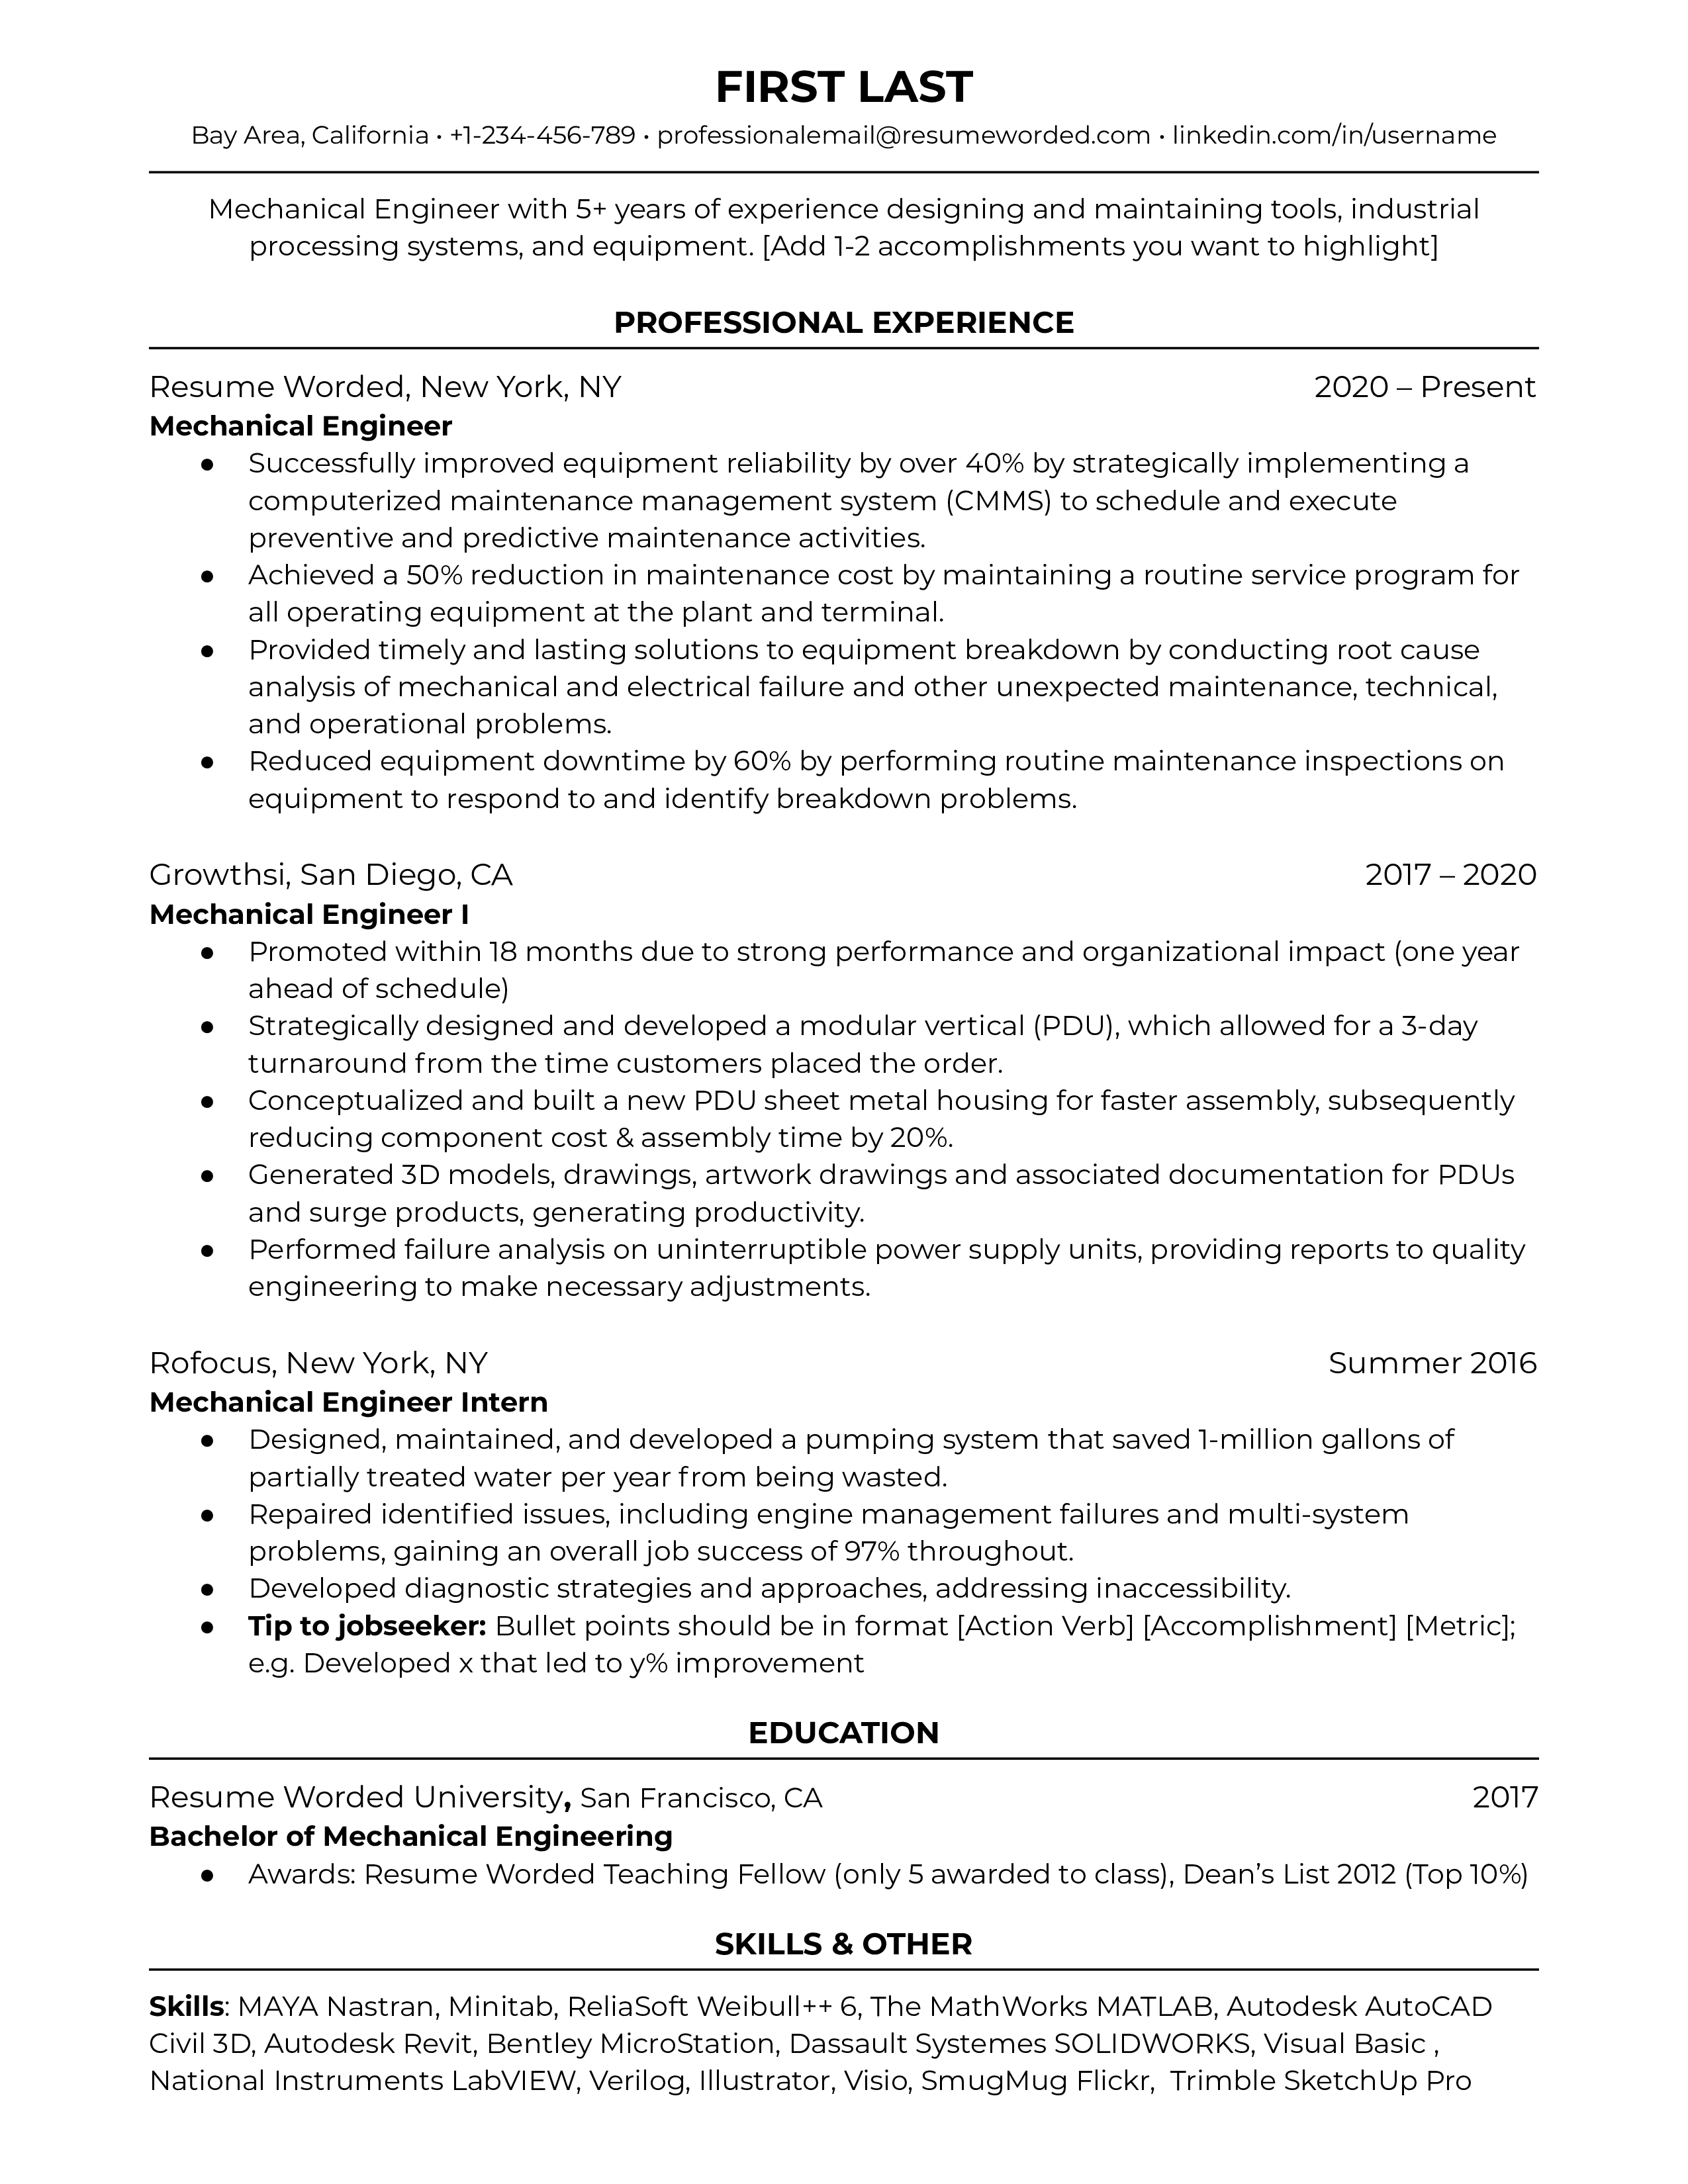 A resume for a mechanical engineer with a degree in mechanical engineering and experience as a mechanical engineer intern.